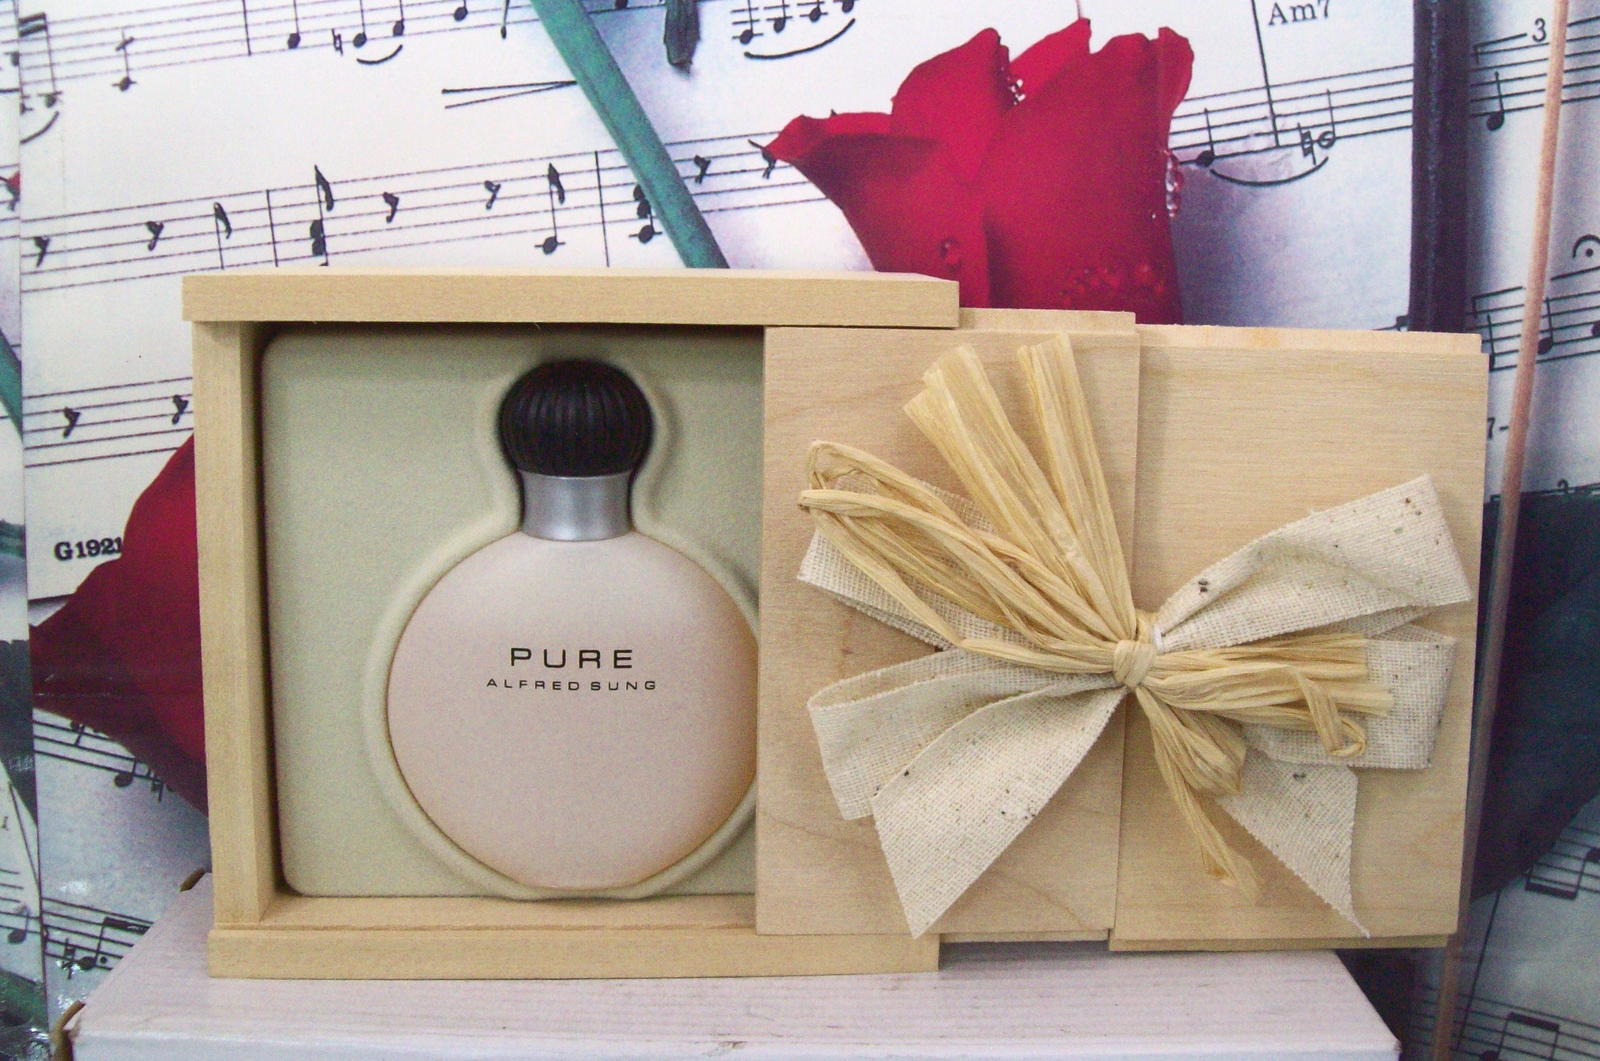 Alfred Sung Pure By Alfred Sung Pure Parfum / Perfume 1.0 FL. OZ. - $219.99